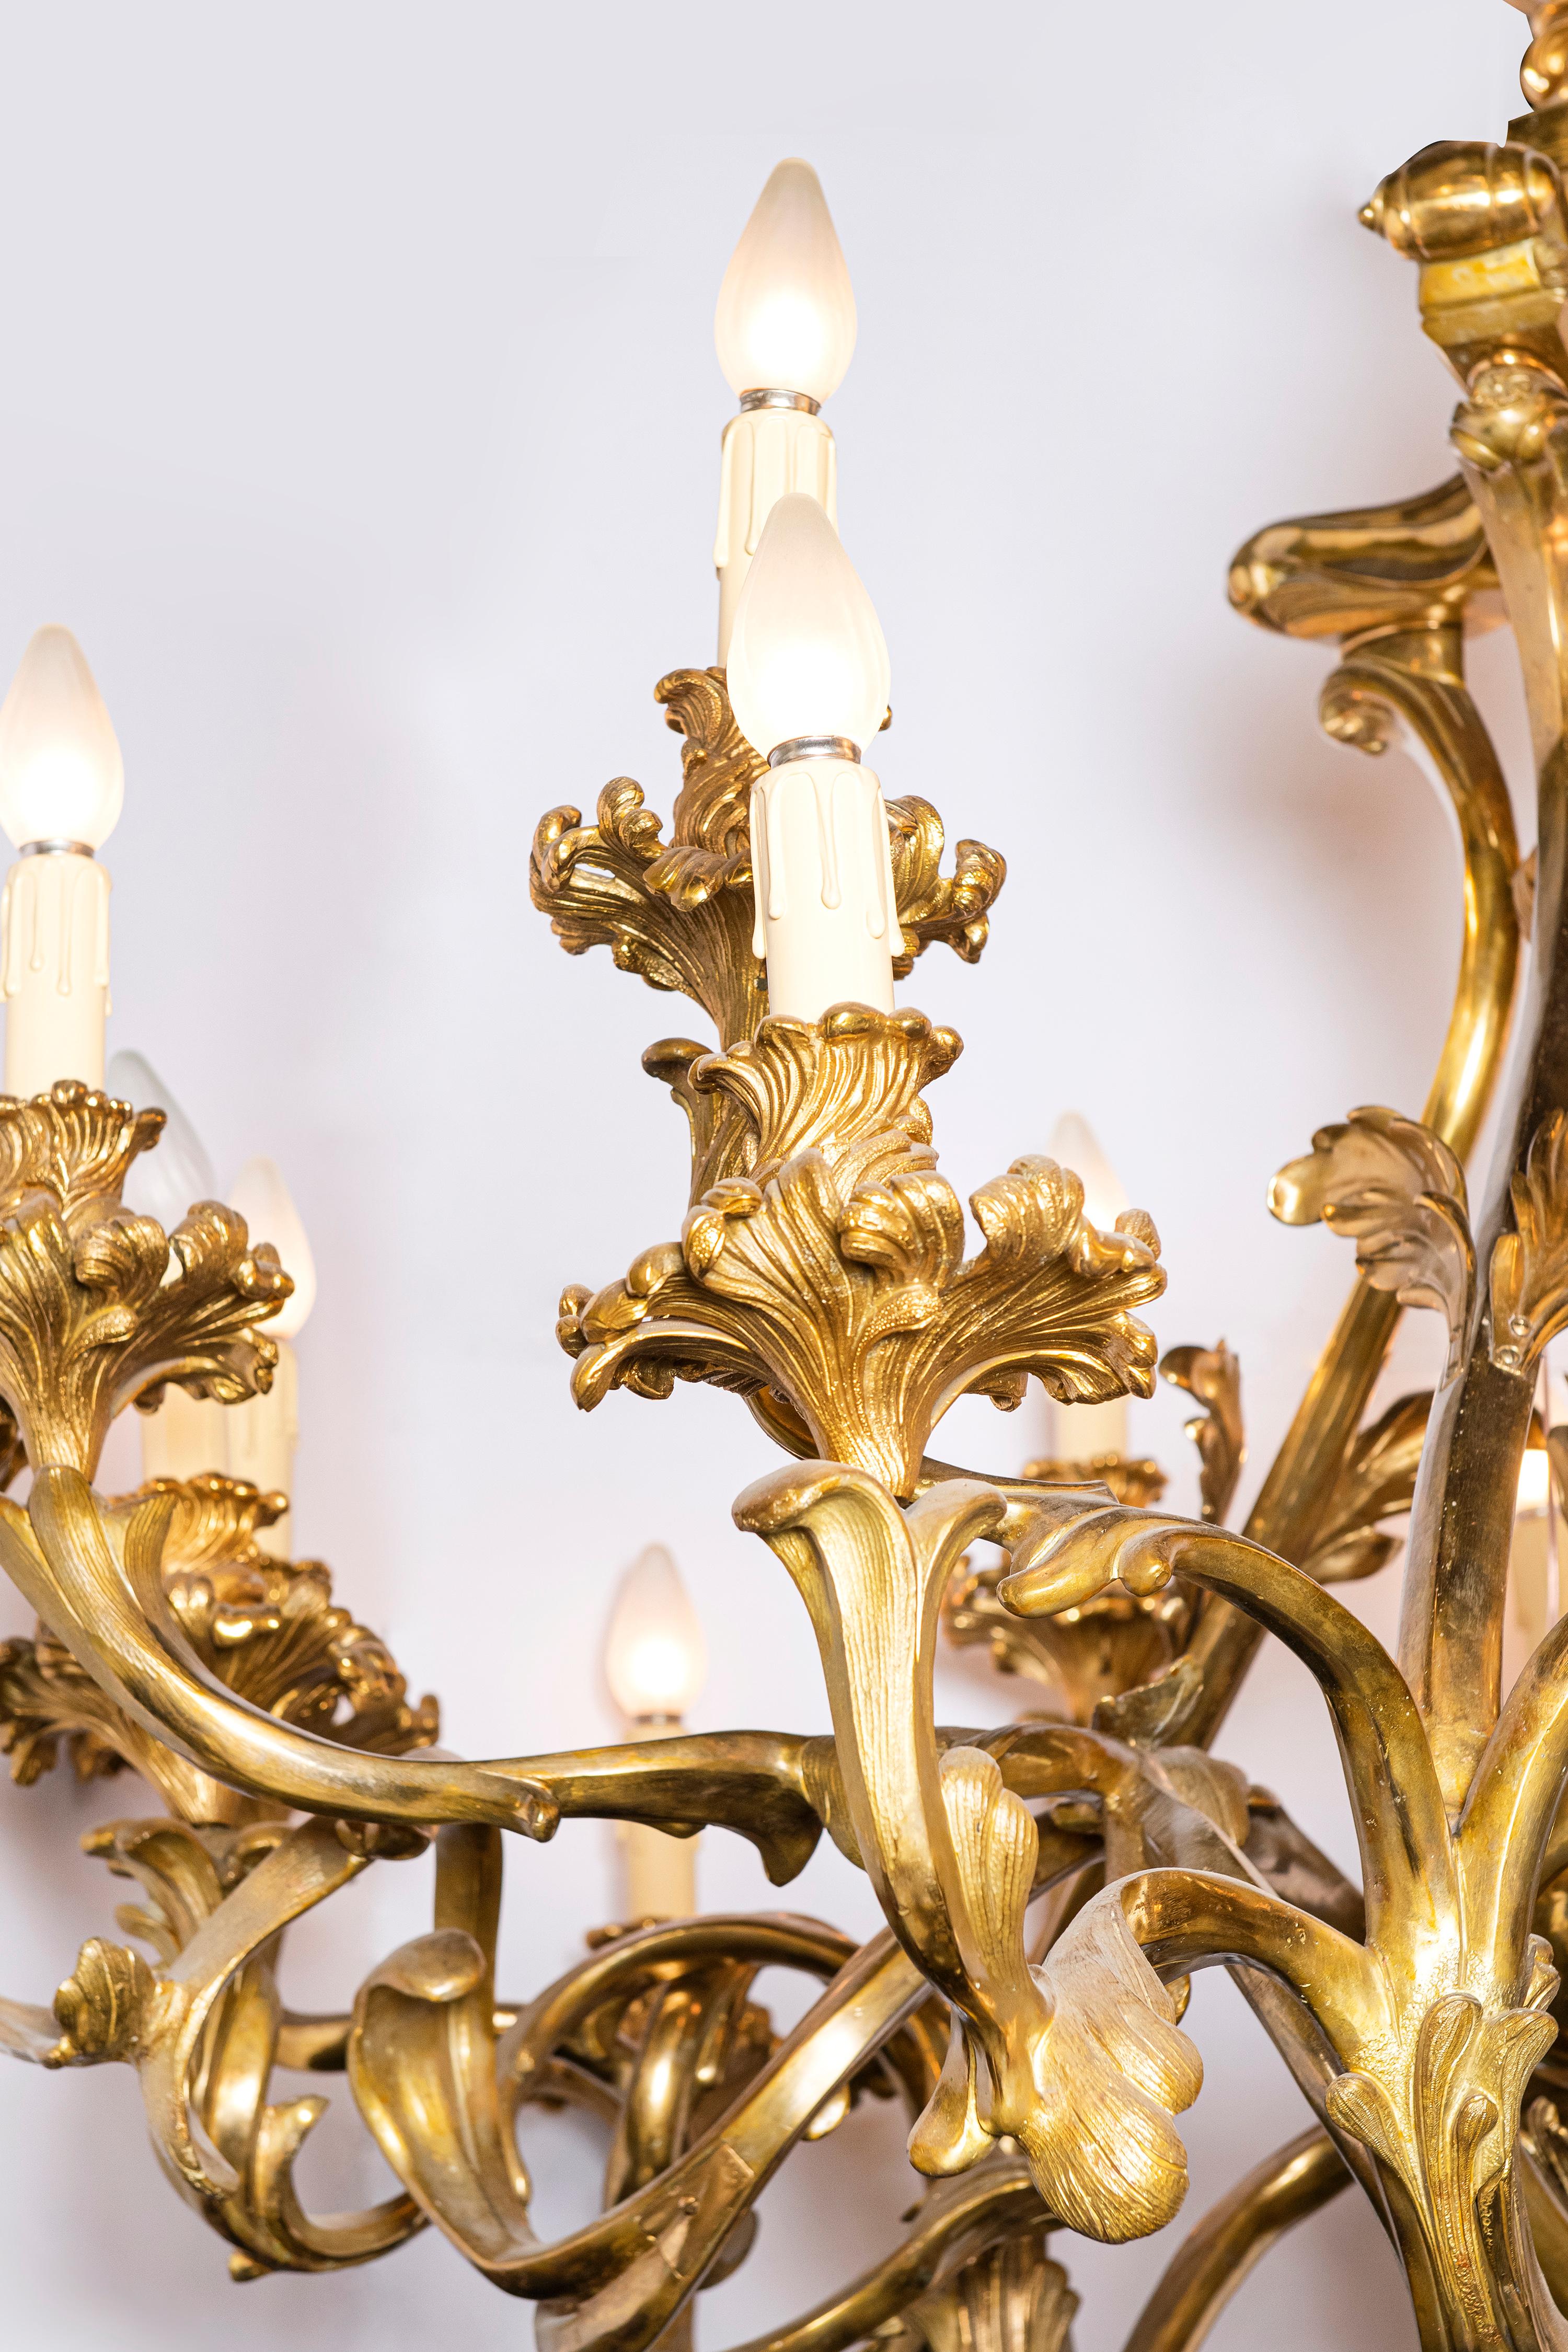 Gilt bronze chandelier with lost-wax process, France, circa 1890.